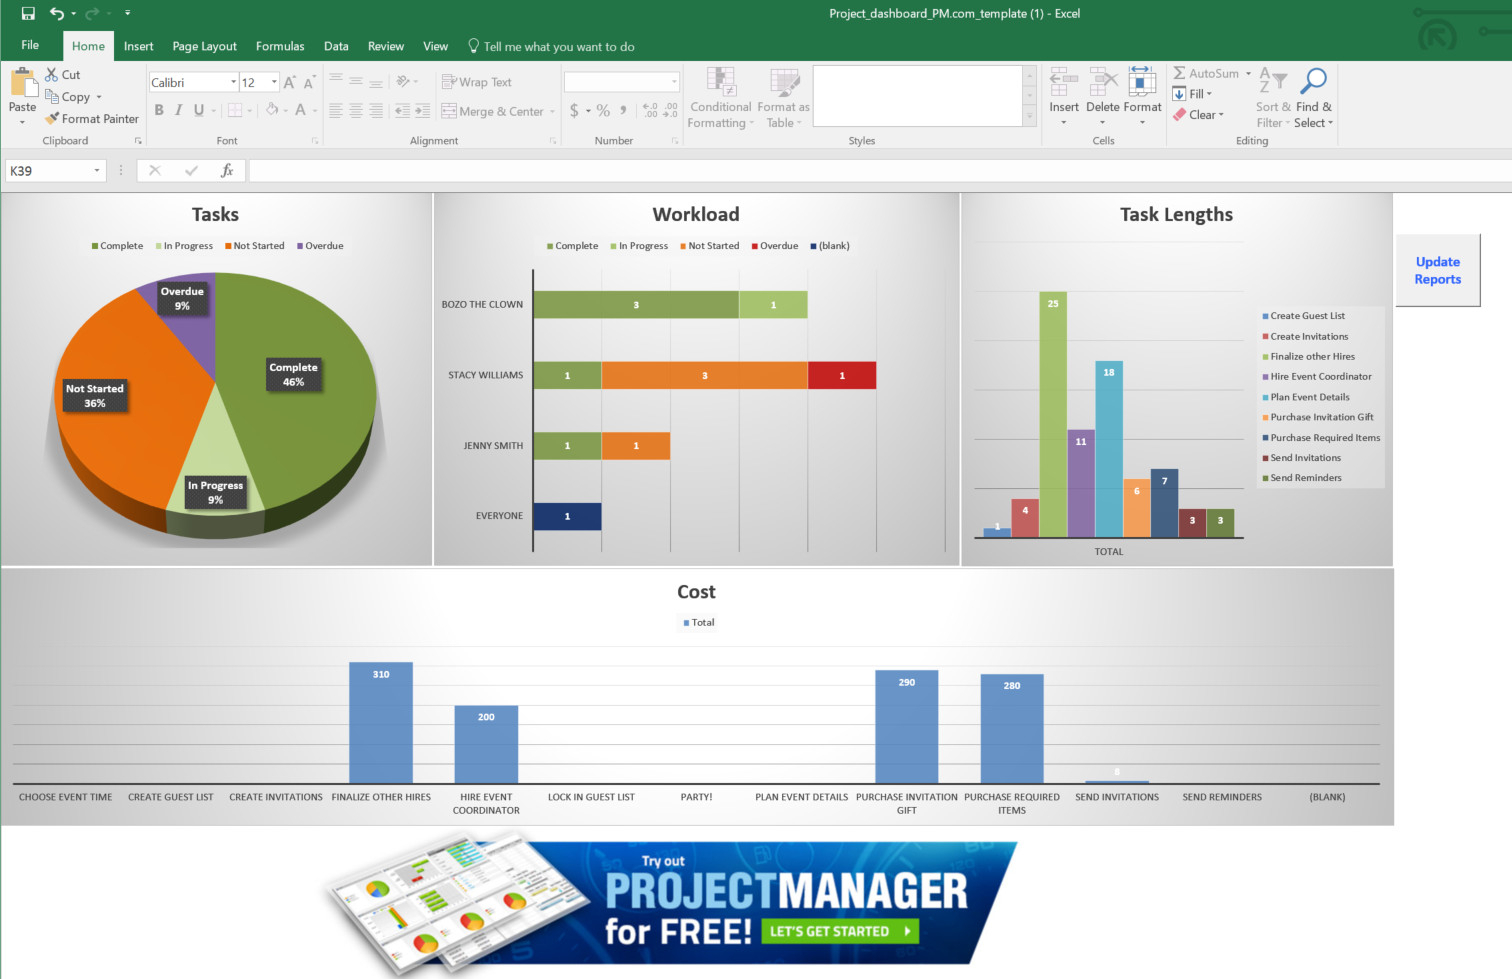 Guide To Excel Project Management - Projectmanager Throughout Project Management Templates Free